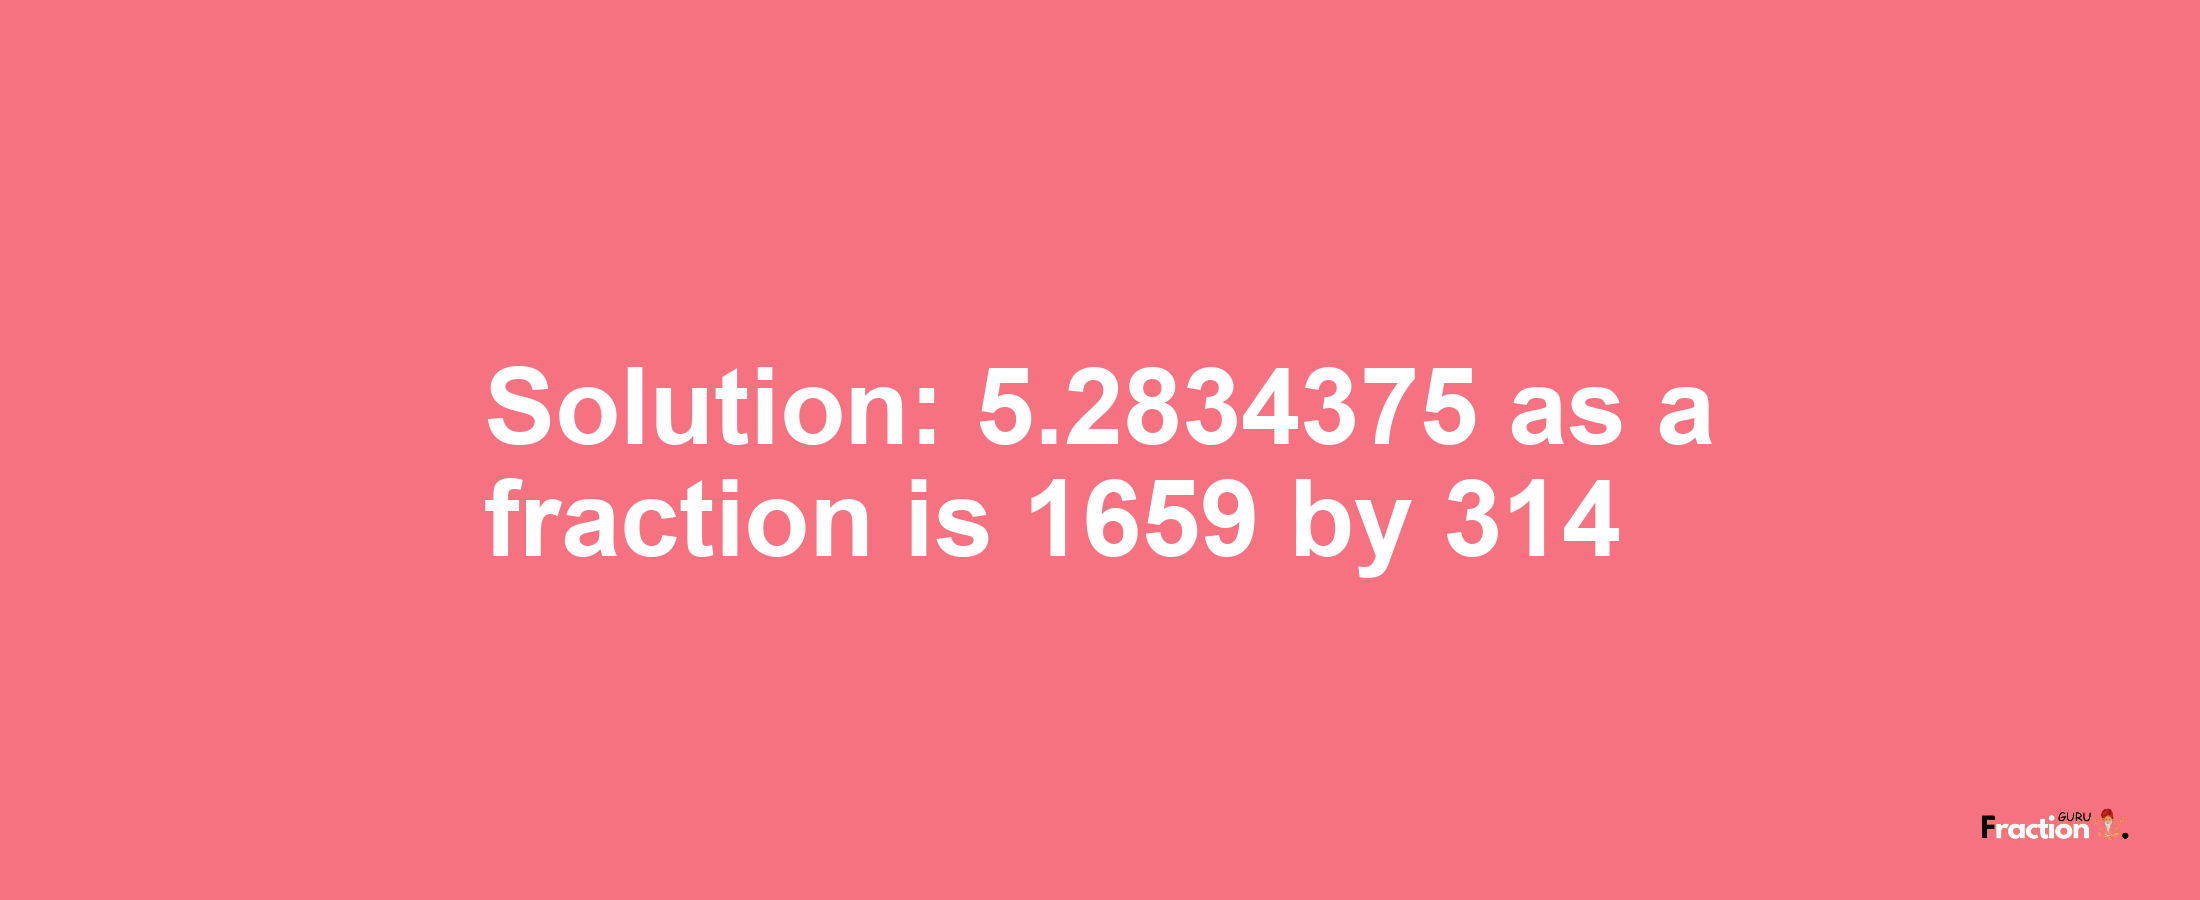 Solution:5.2834375 as a fraction is 1659/314